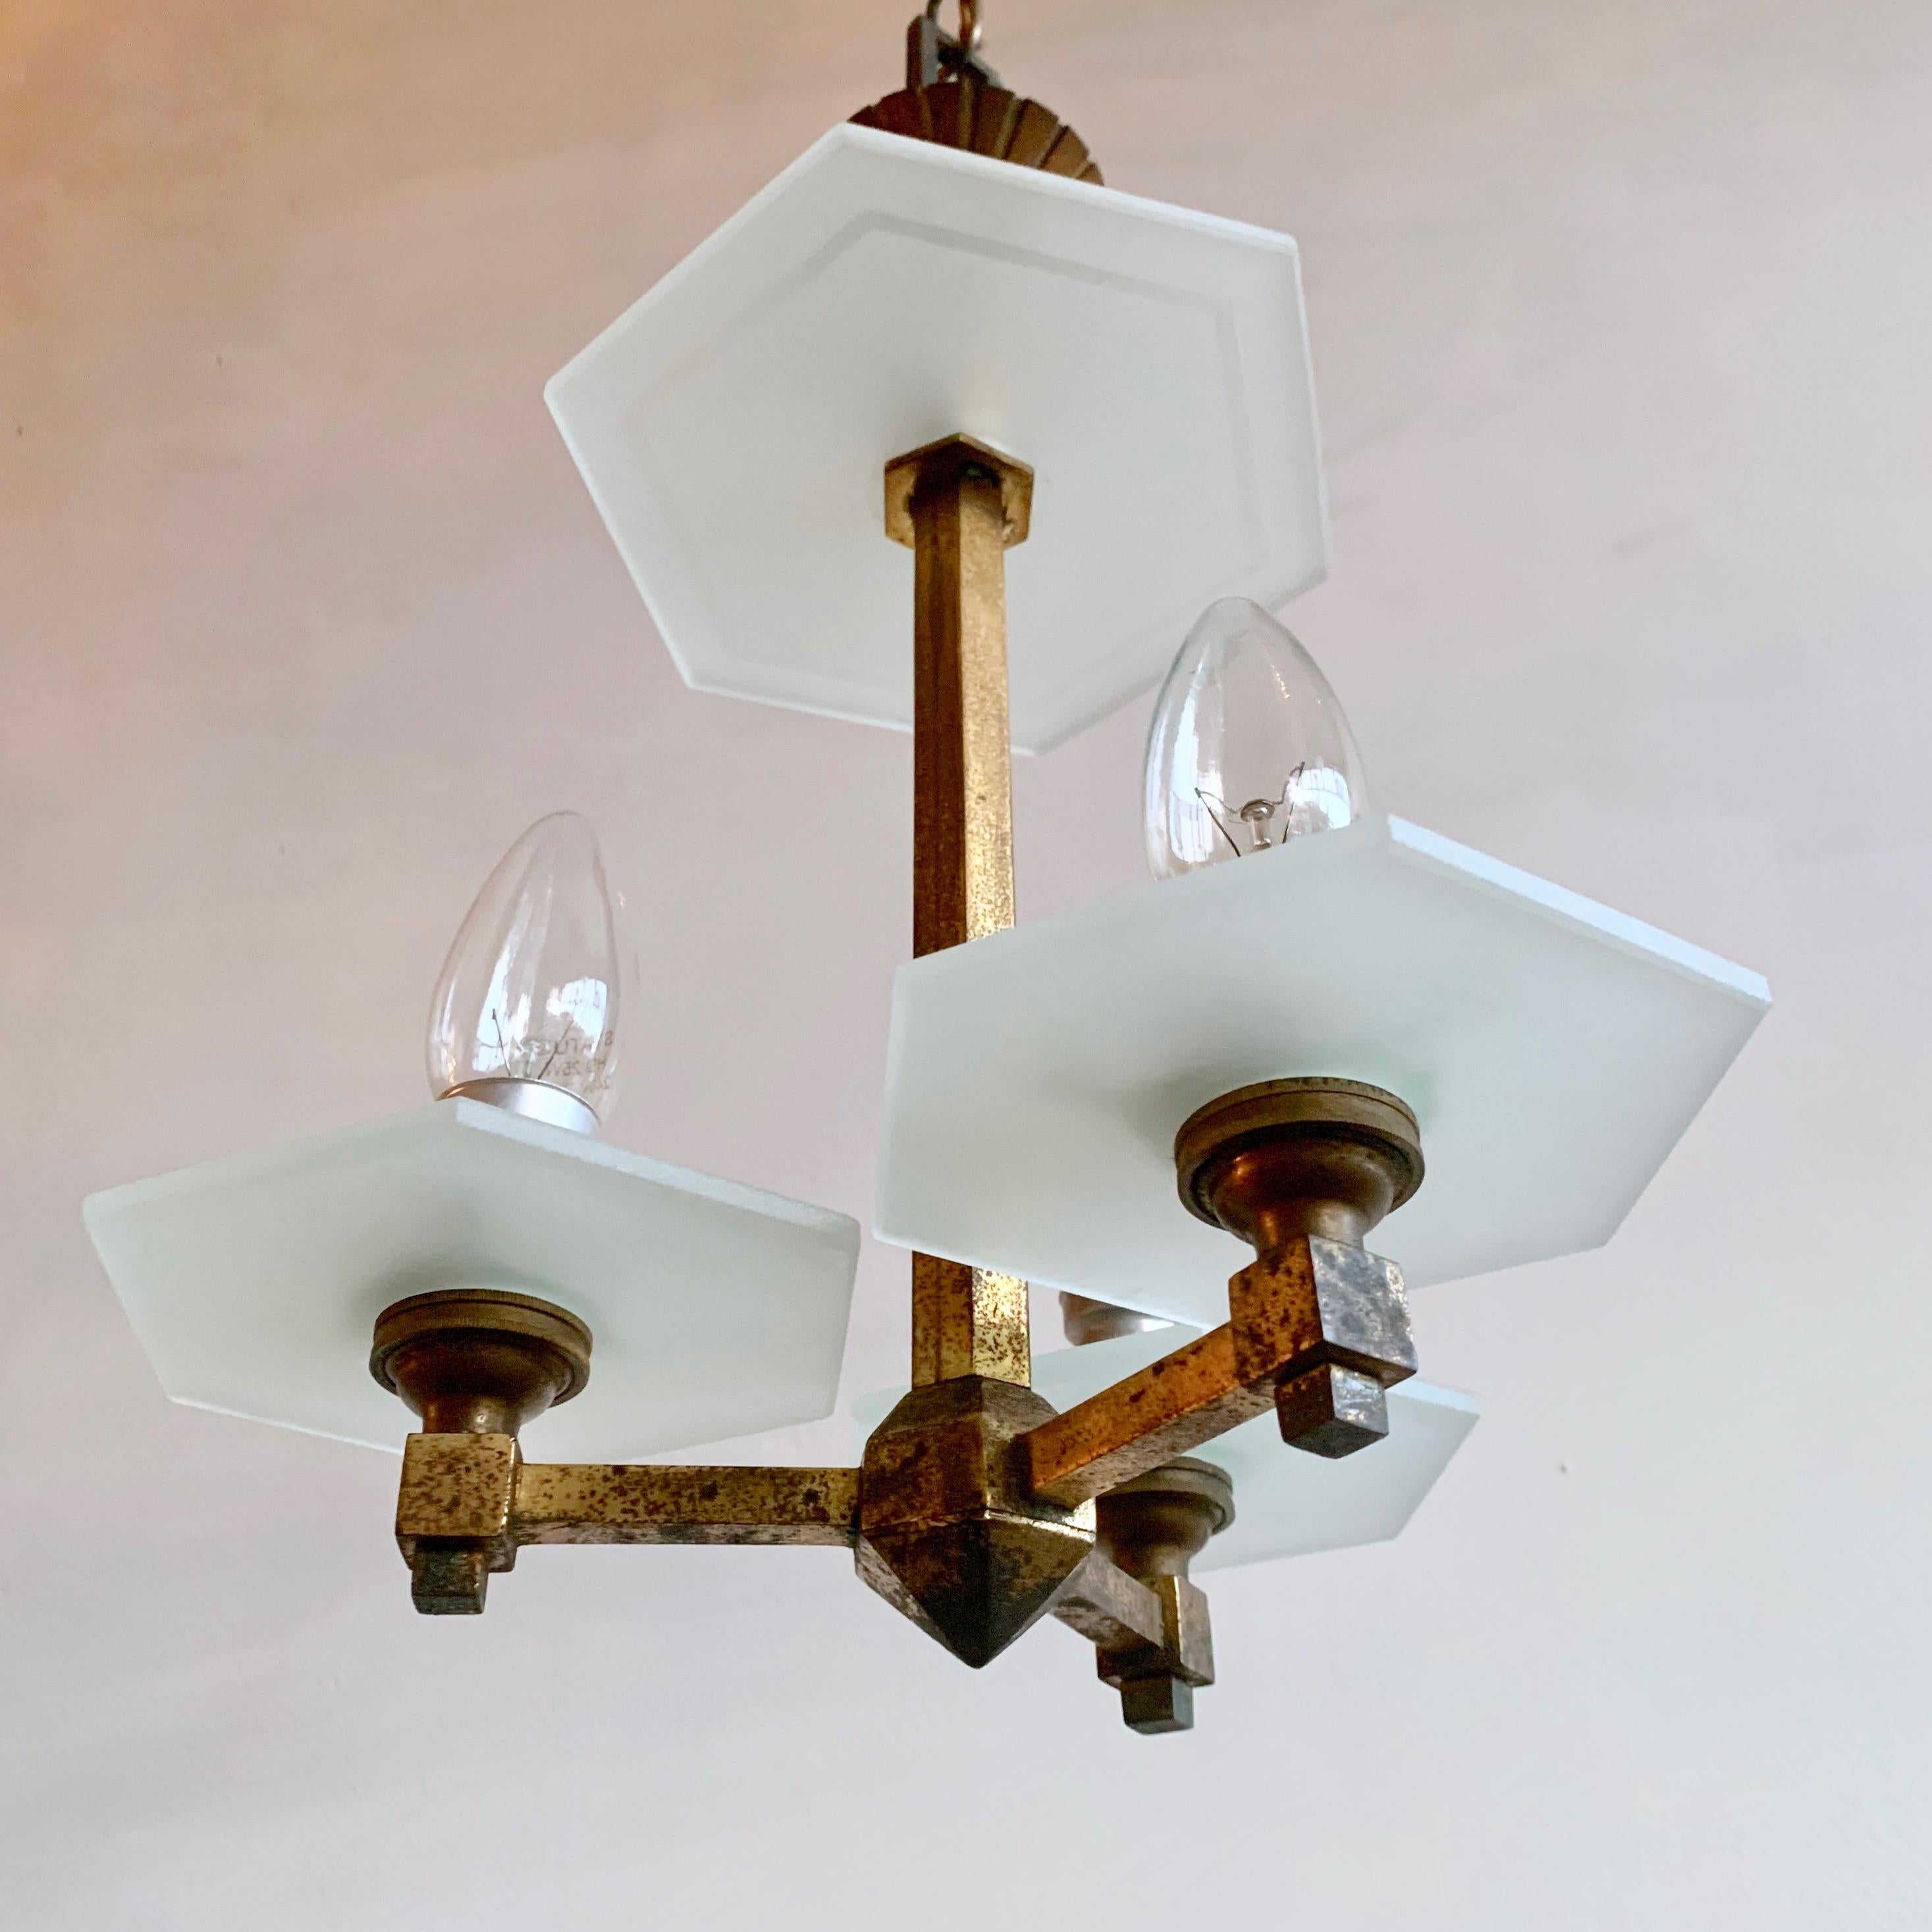 Petite 1930s Art Deco brass chandelier with hexagonal frosted glass pieces. This chandelier has three lamps. This piece was originally gilt that has aged leaving an off-black and gold patina. It has elegant proportions and would suit a hall way or